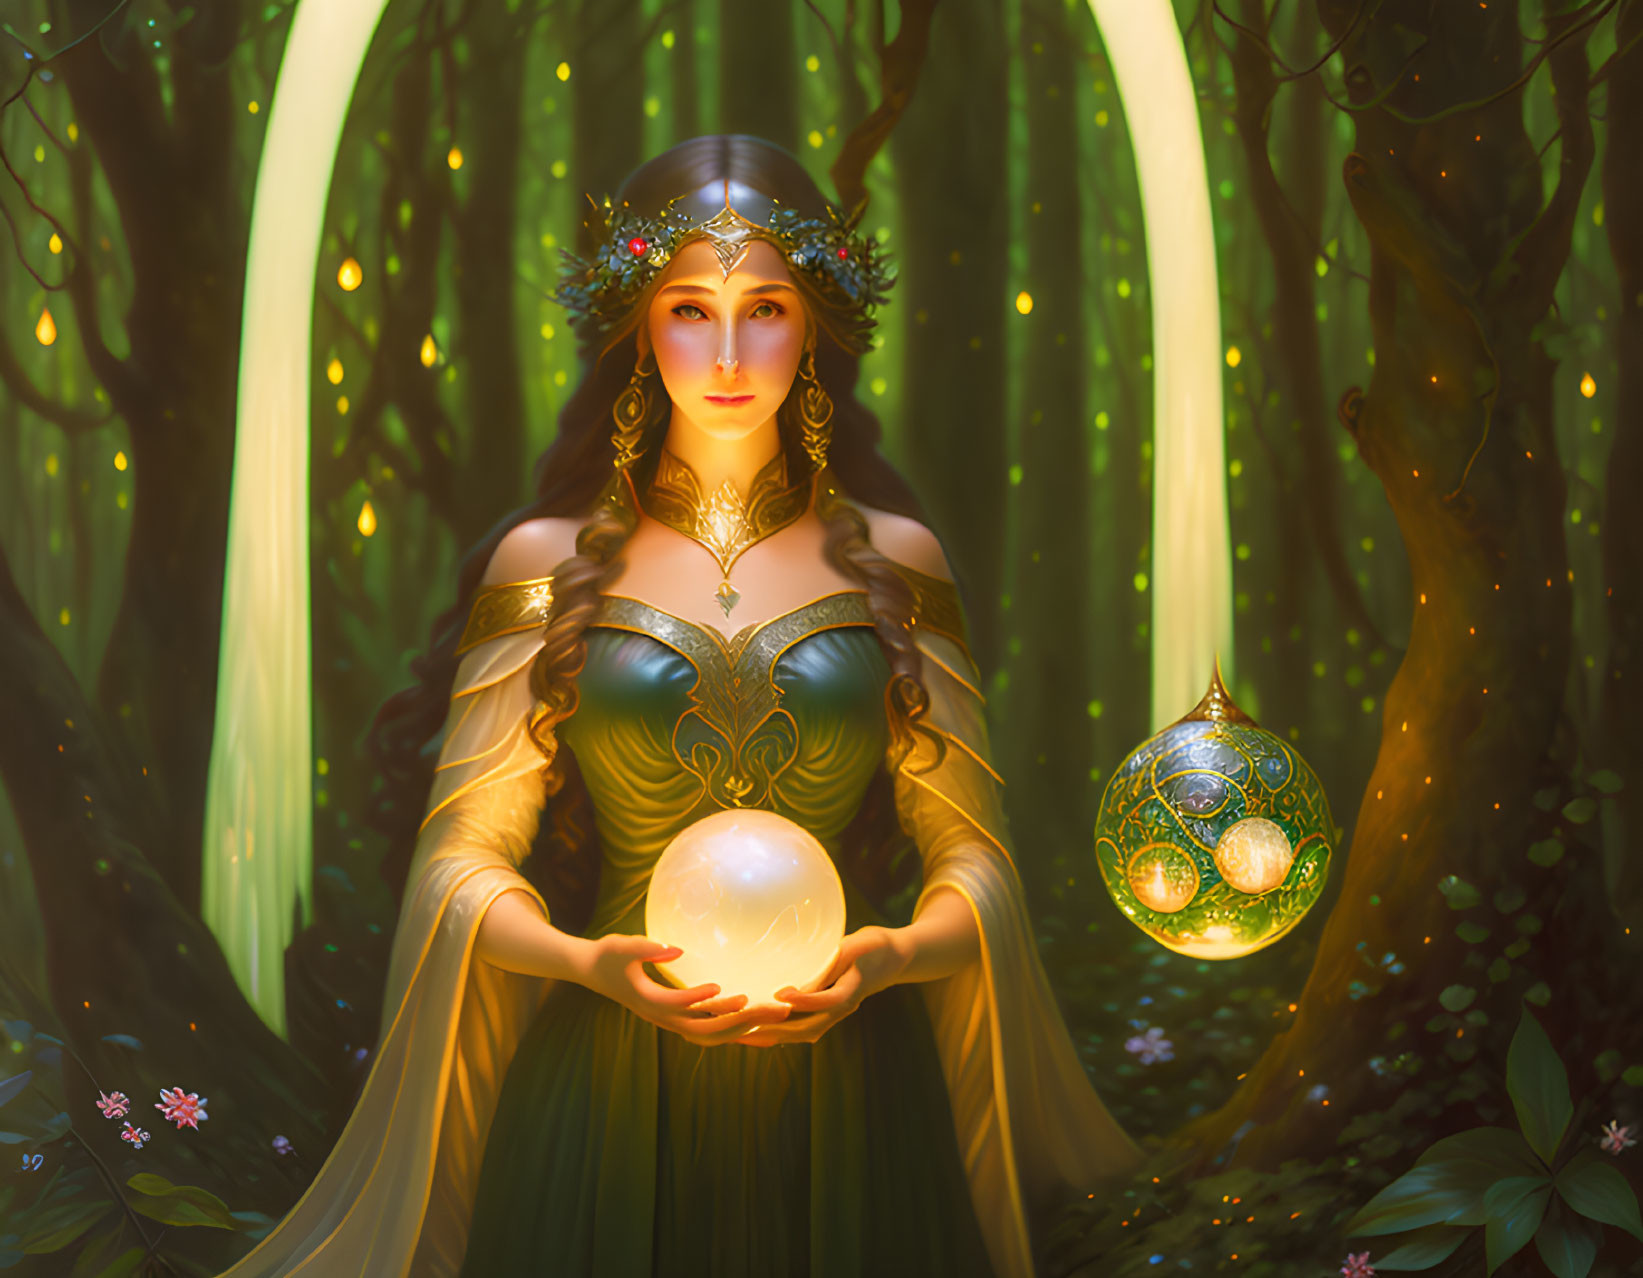 Mystical woman with jeweled tiara in enchanted forest with glowing orb